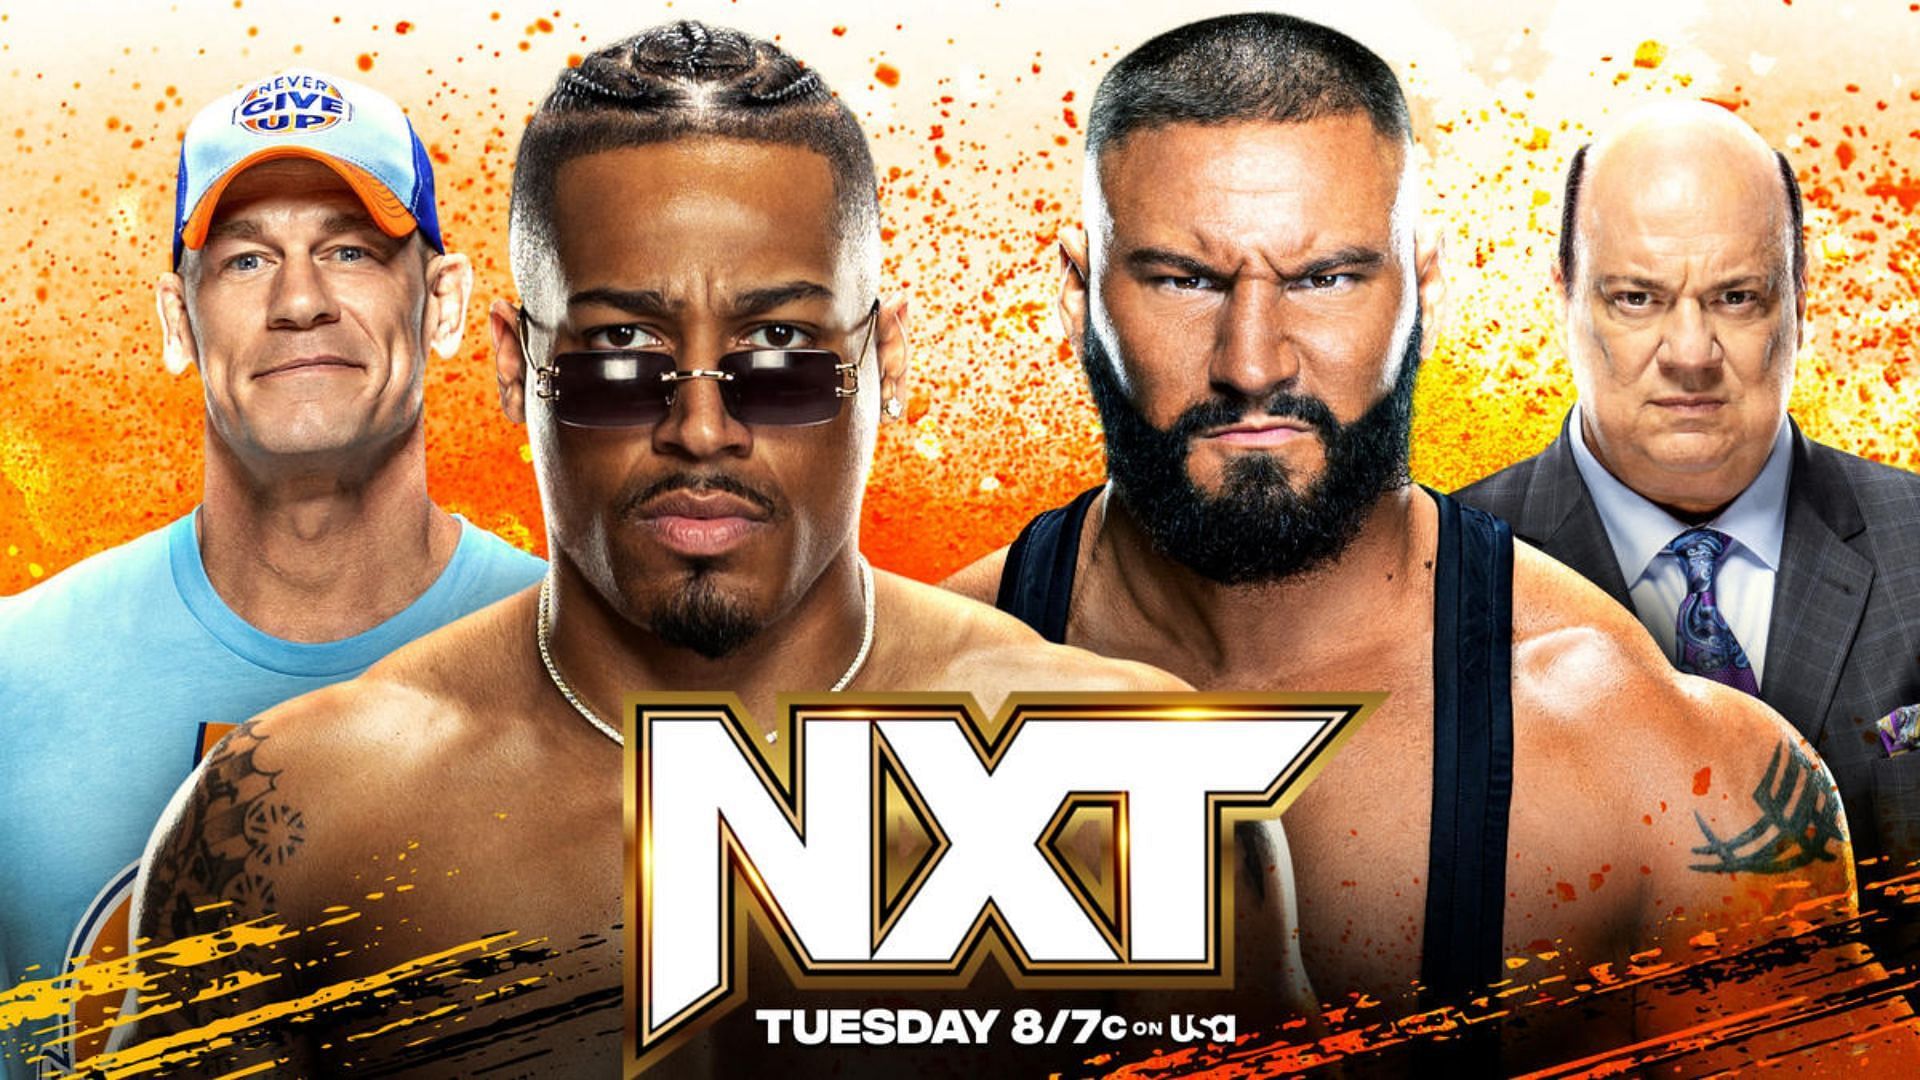 The two former NXT champions face each other in a singles match next week.